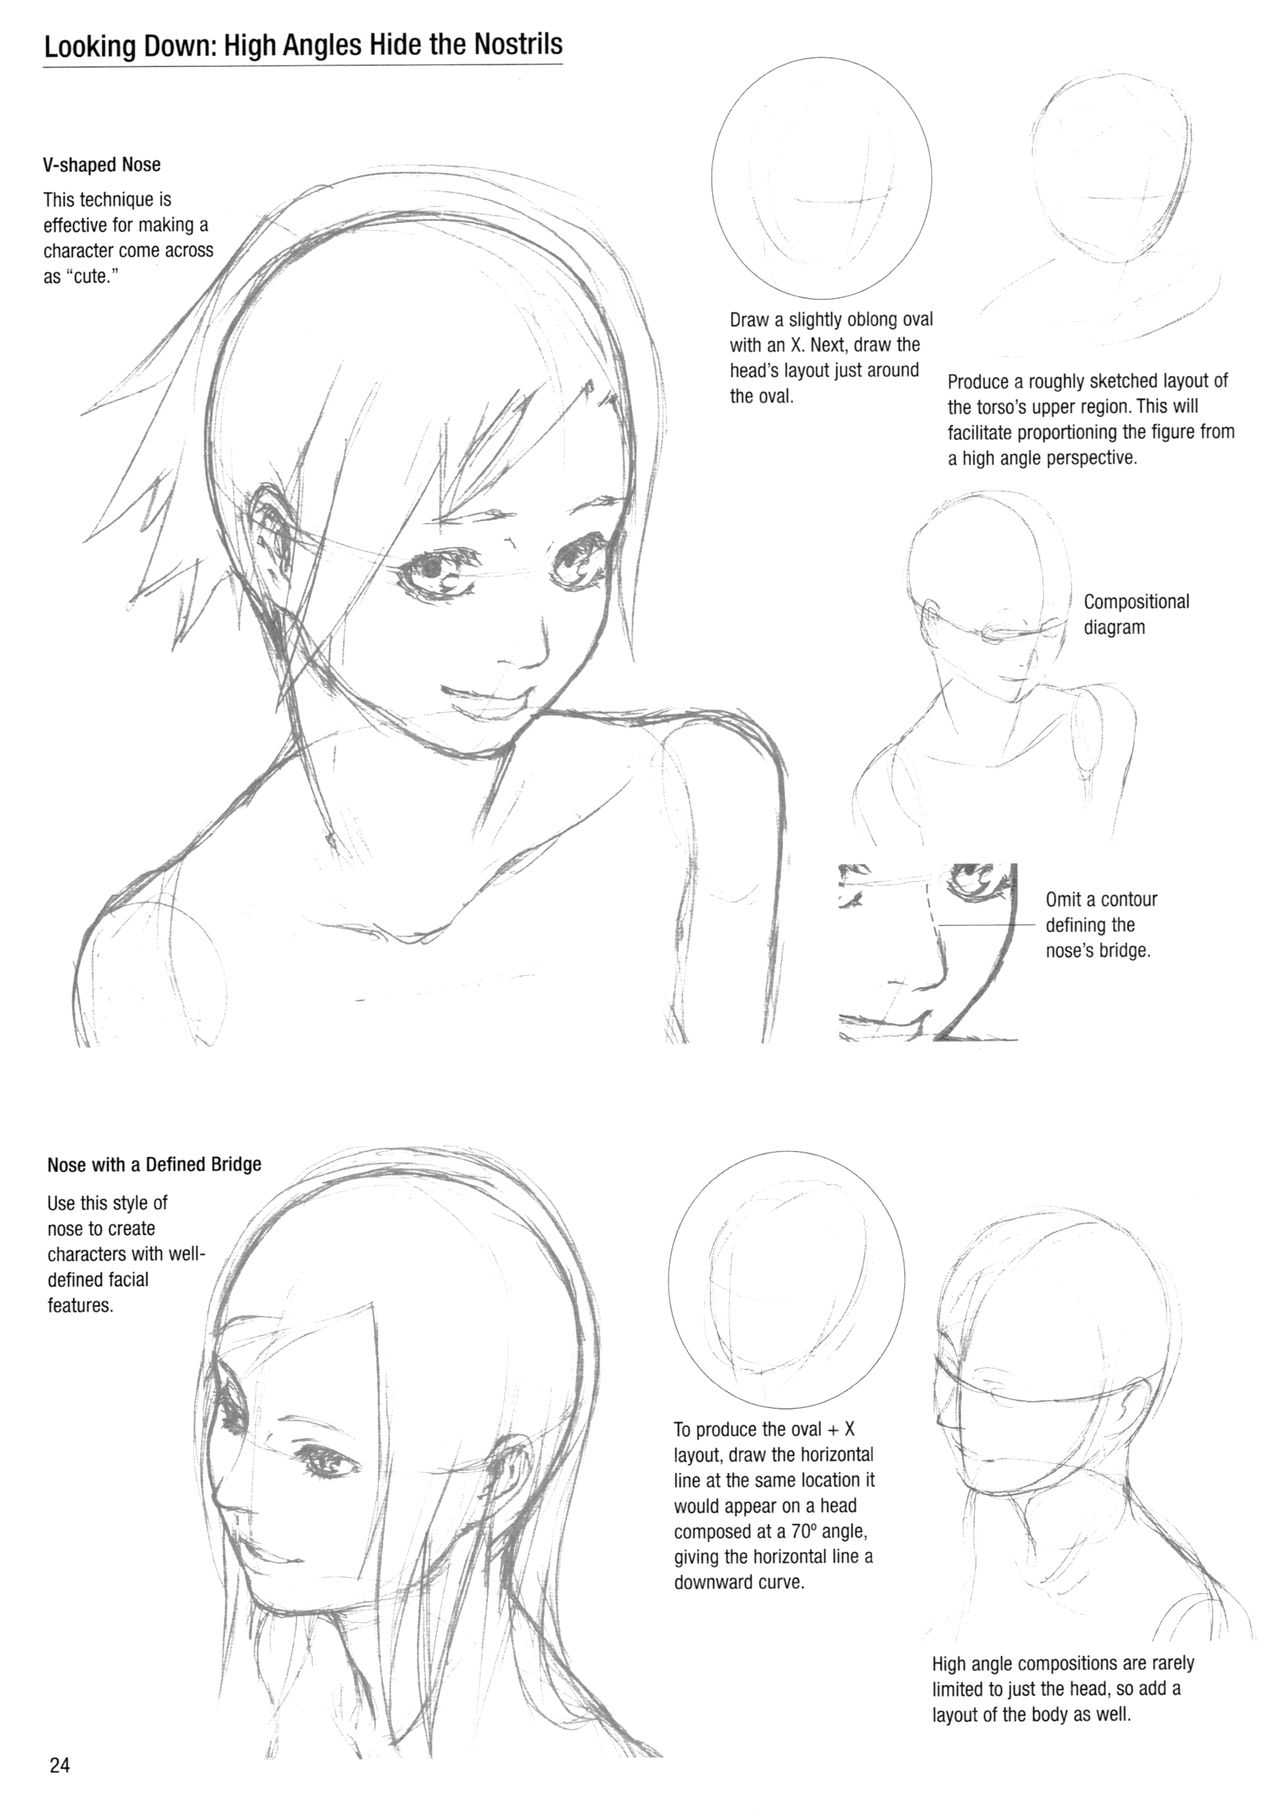 Sketching Manga-Style Vol. 3 - Unforgettable Characters 23